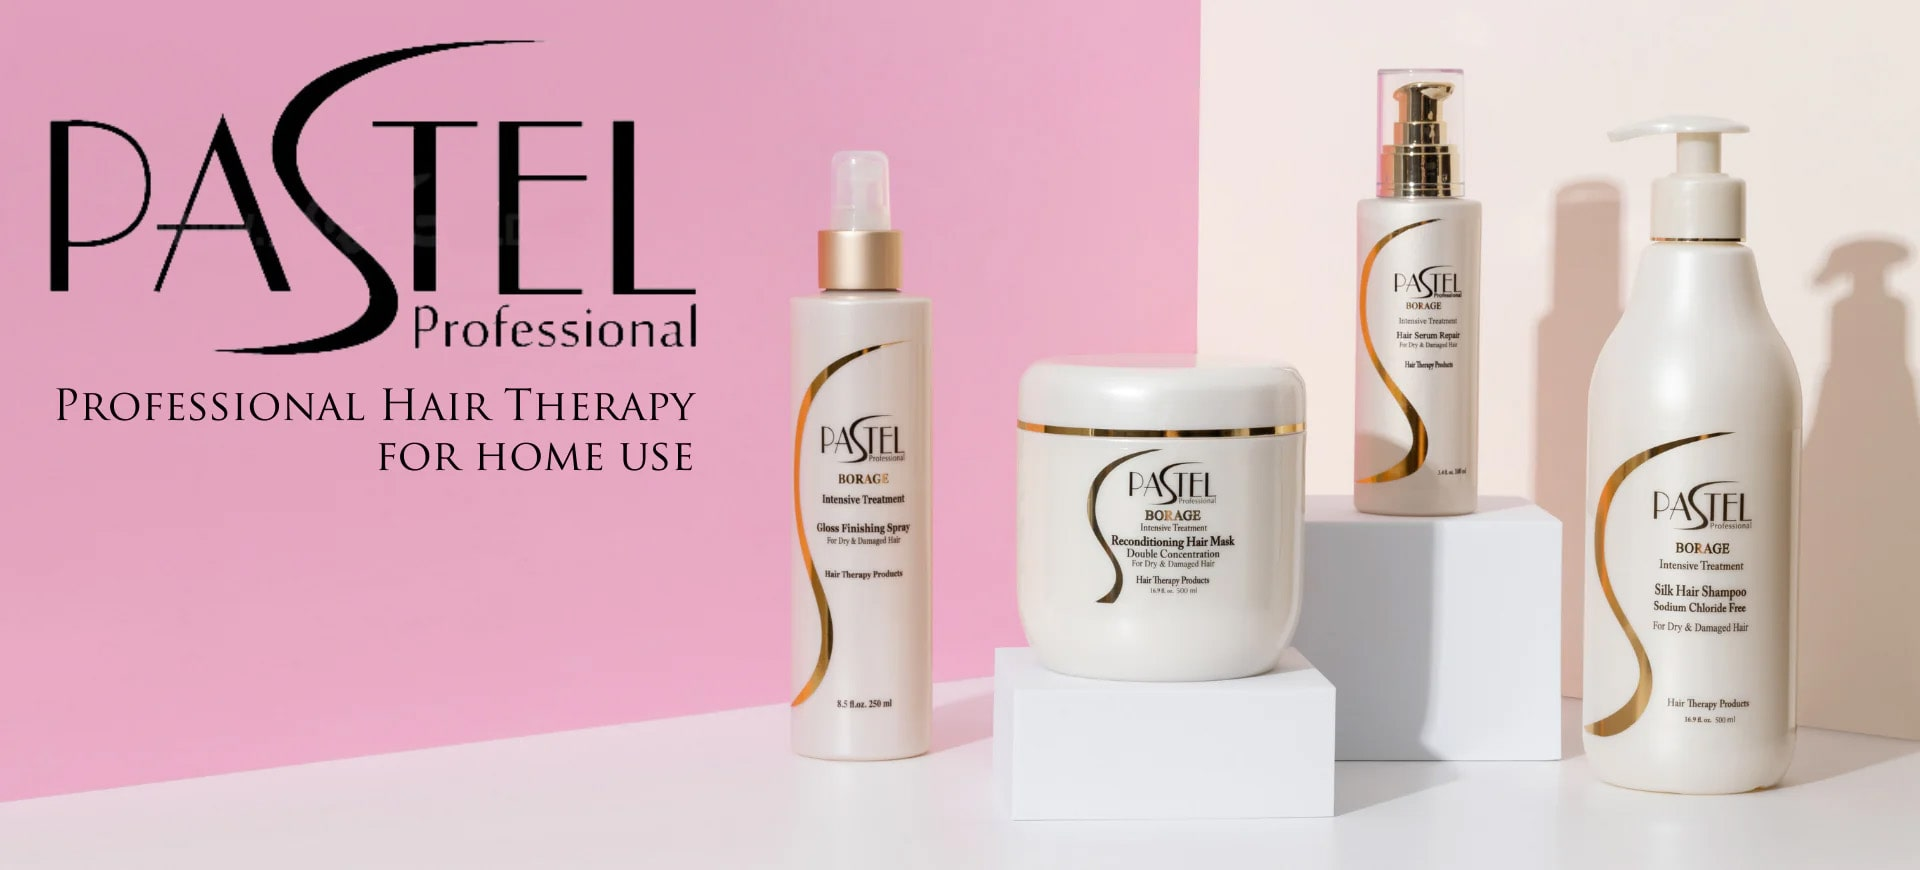 Pastel Professional hair care therapy | Salon quality hair care